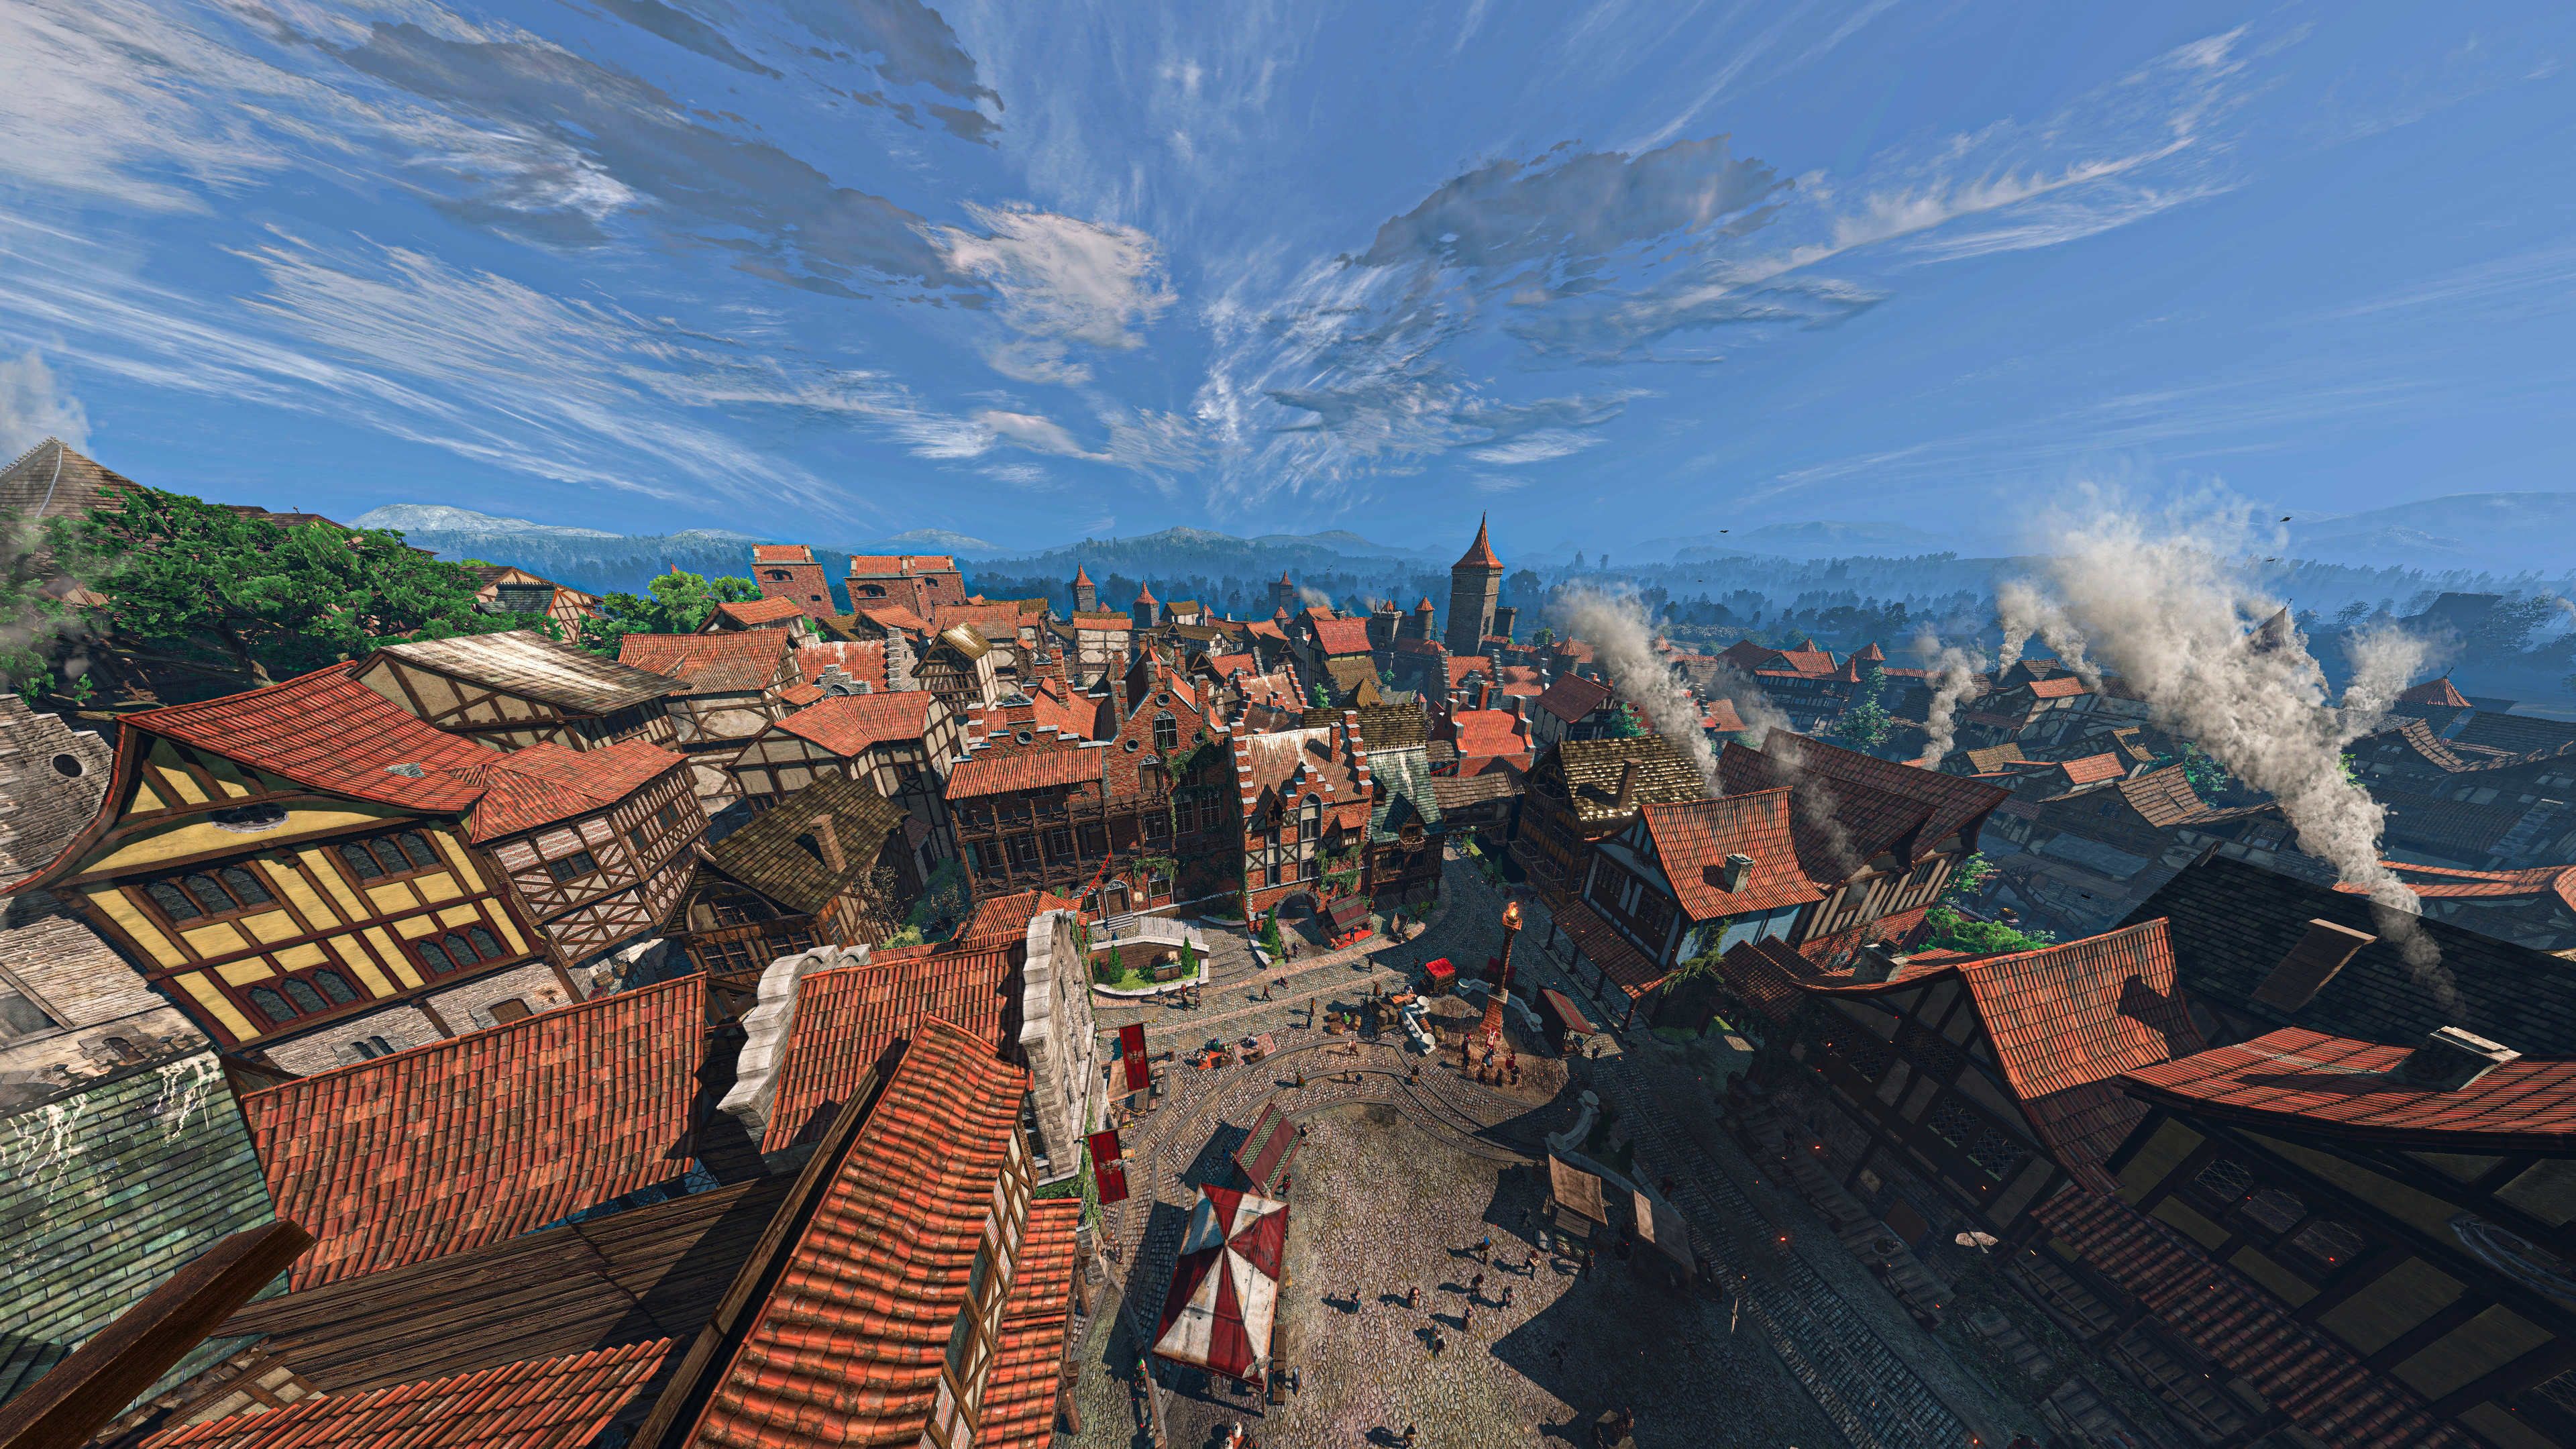 The Witcher The Witcher 3 Wild Hunt Nilfgaard Novigrad Video Games Rooftops 3840x2160